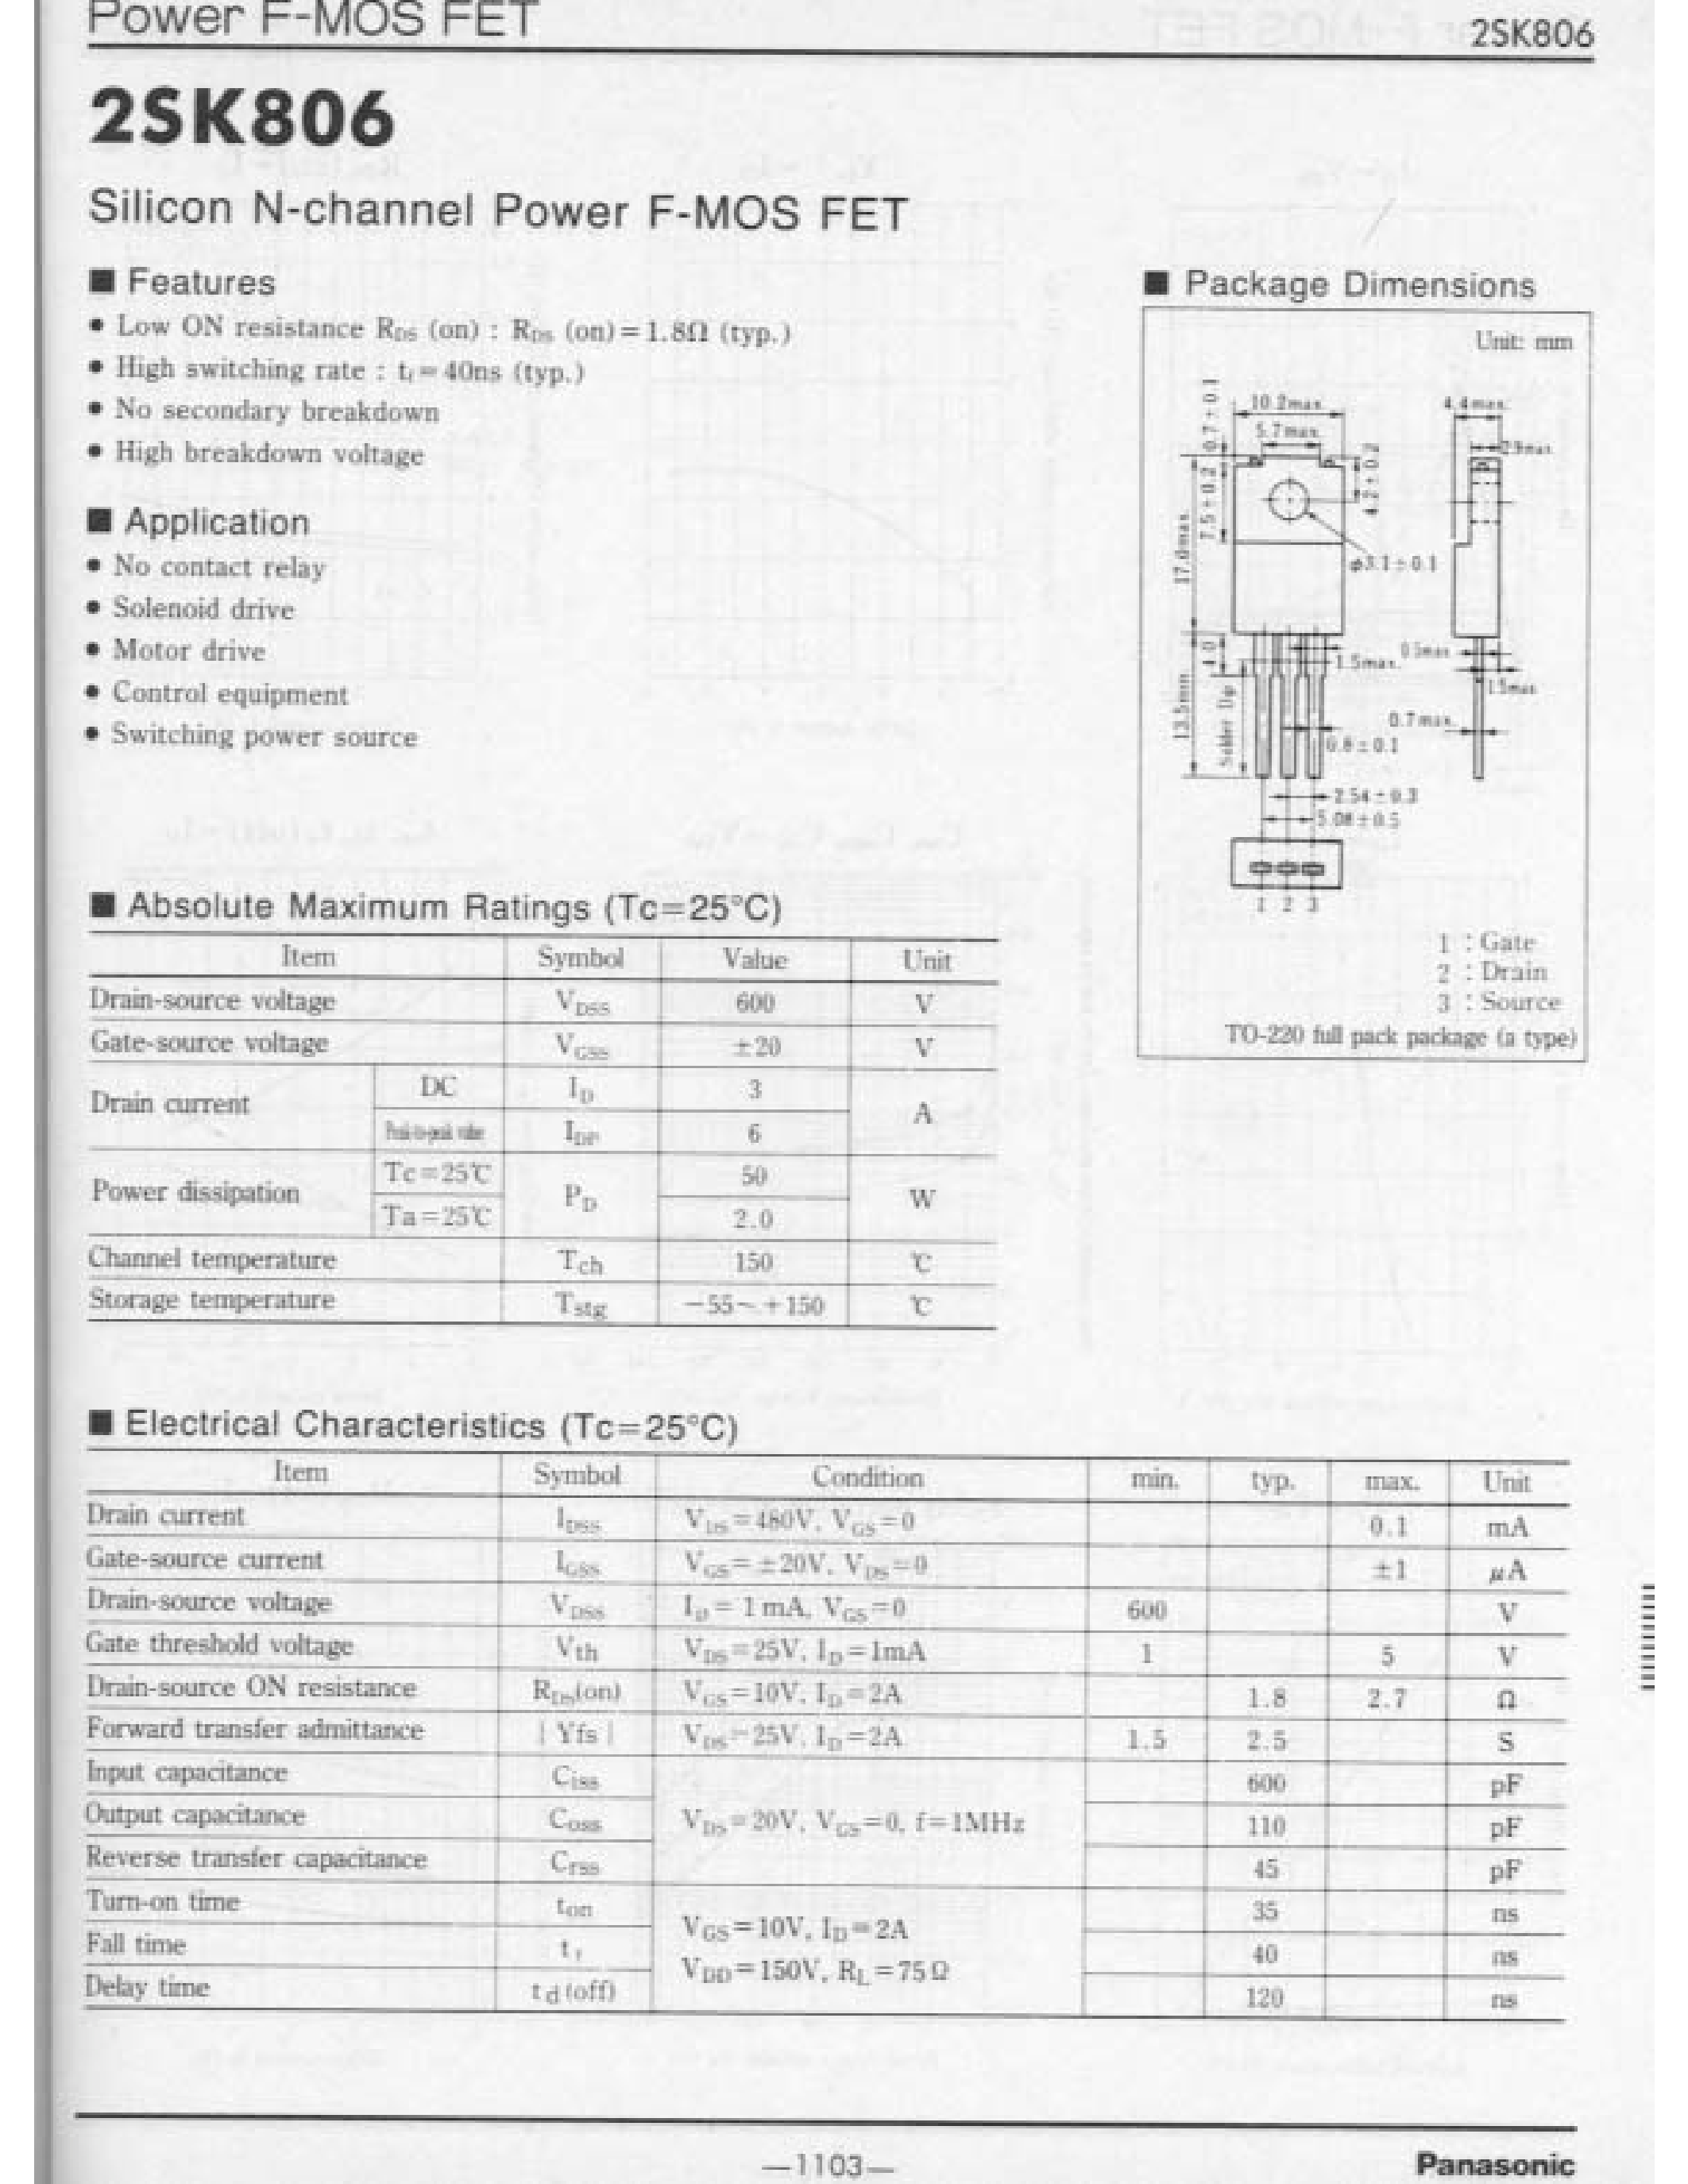 Datasheet 2SK806 - Silicon N-channel Power F-MOS FET page 1